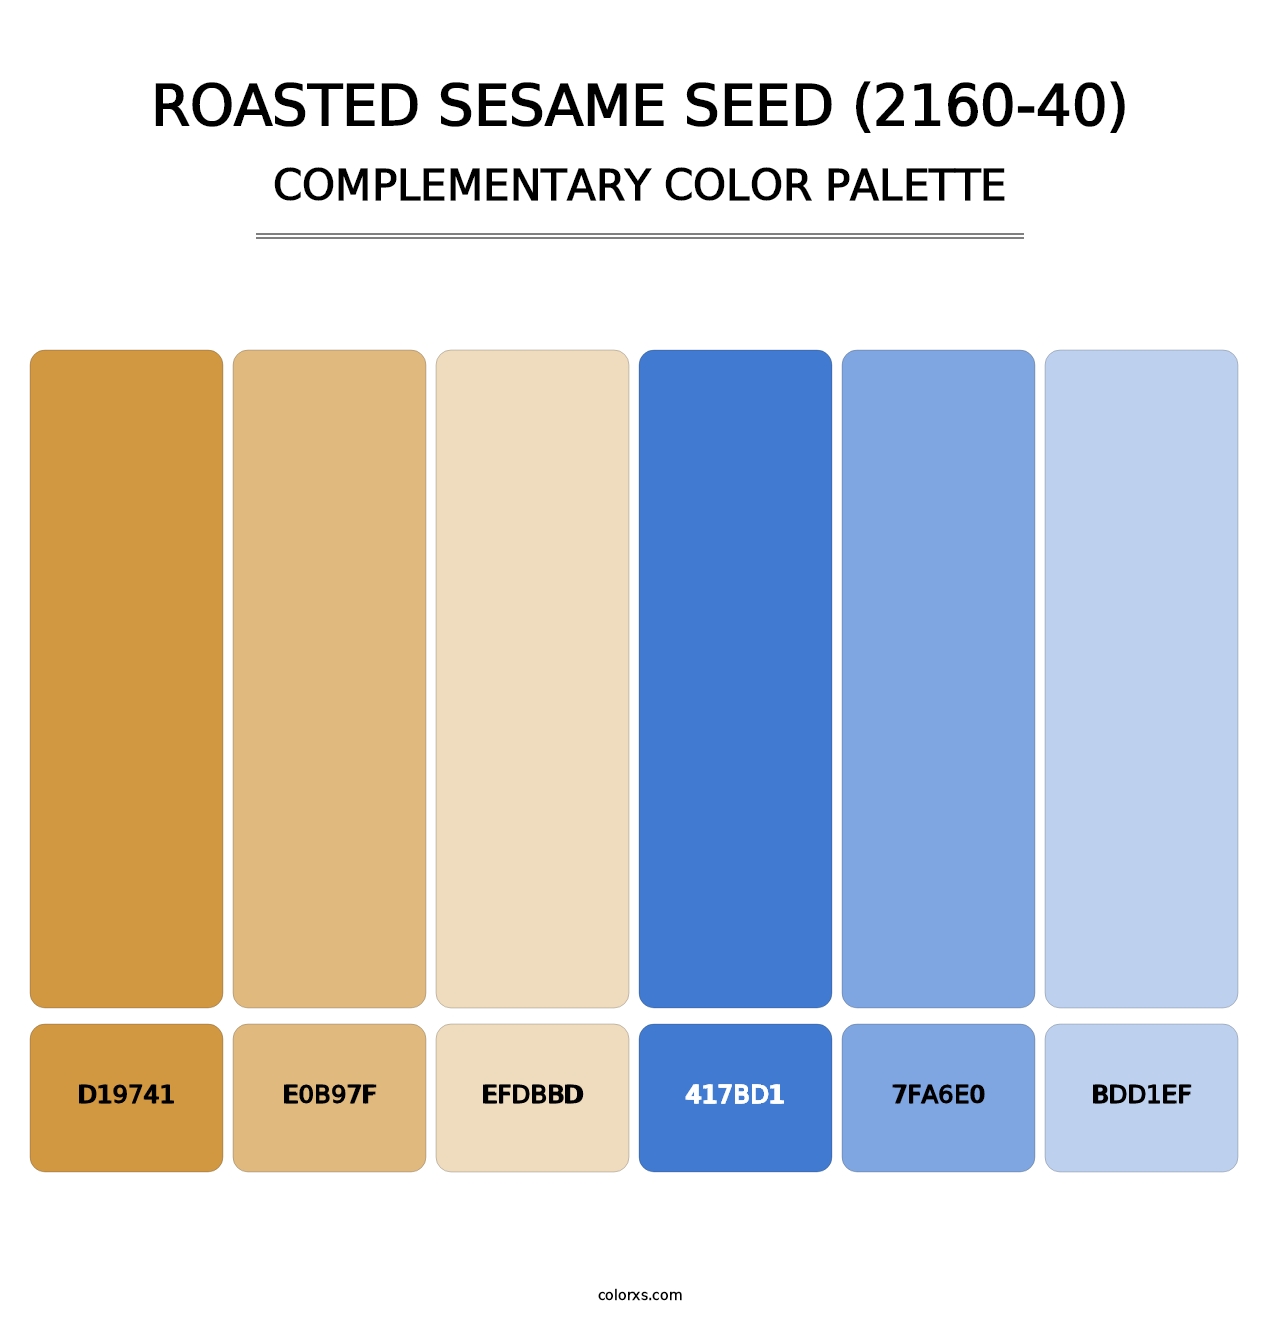 Roasted Sesame Seed (2160-40) - Complementary Color Palette